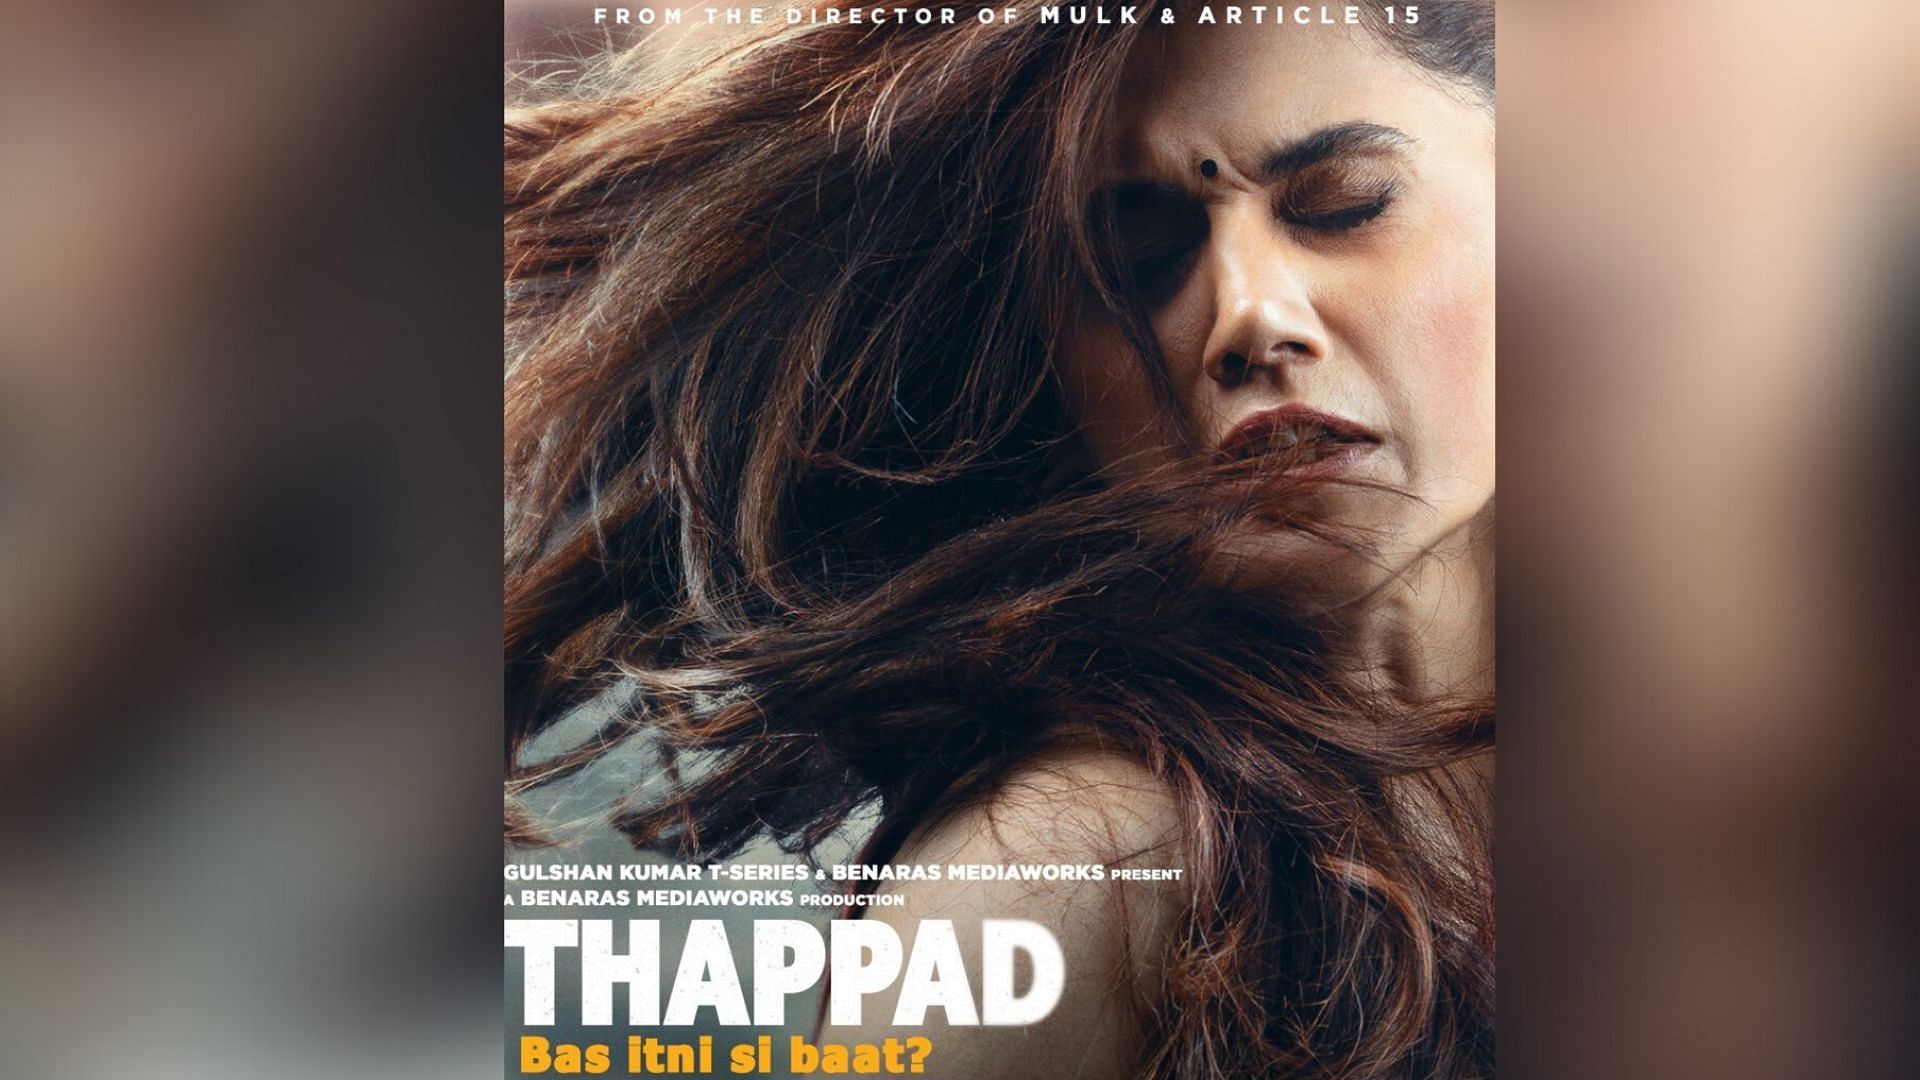 Taapsee Pannu in the poster of <i>Thappad</i>